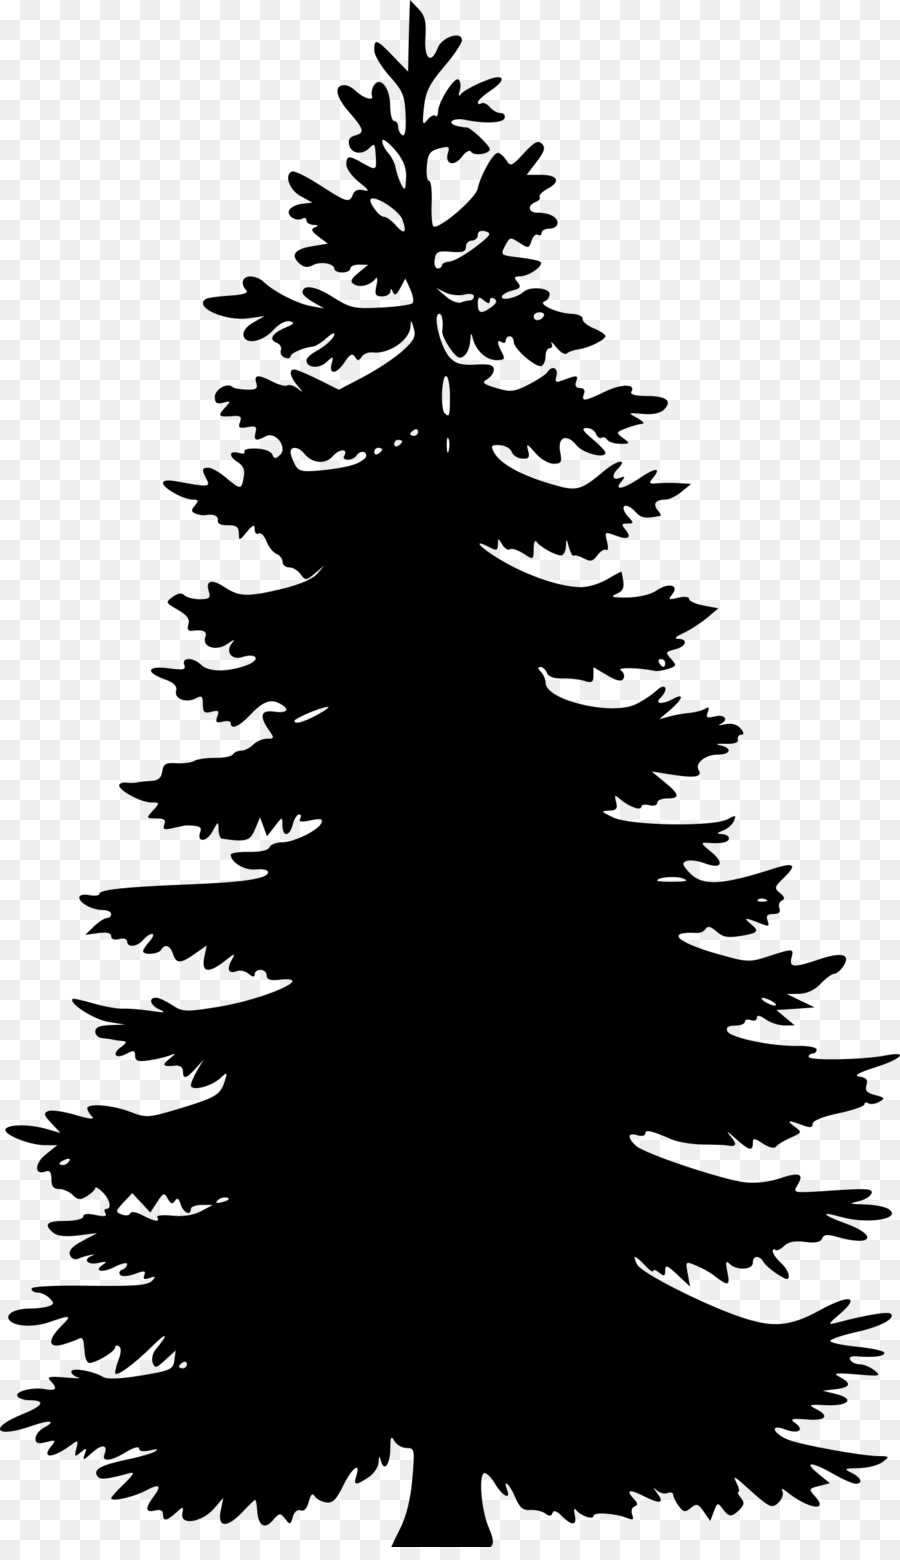 Pine Tree Fir Silhouette Clip art - tree vector png download - 1396*2400 - Free Transparent Pine png Download.